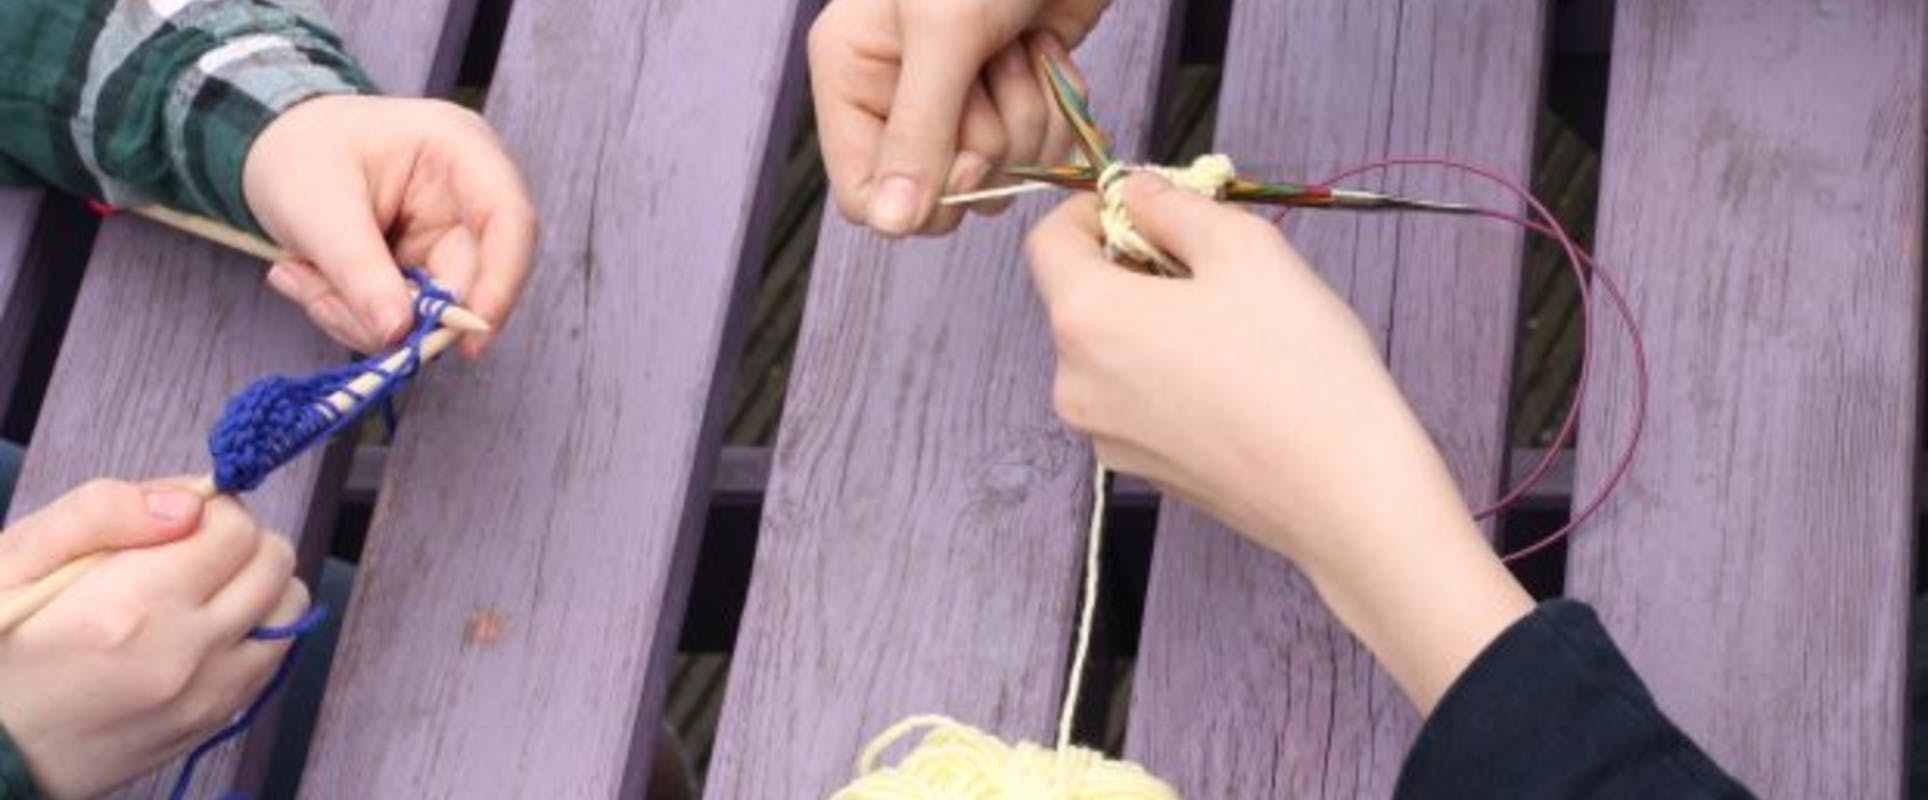 Learn to Knit: Teach Yourself How to Knit - FeltMagnet